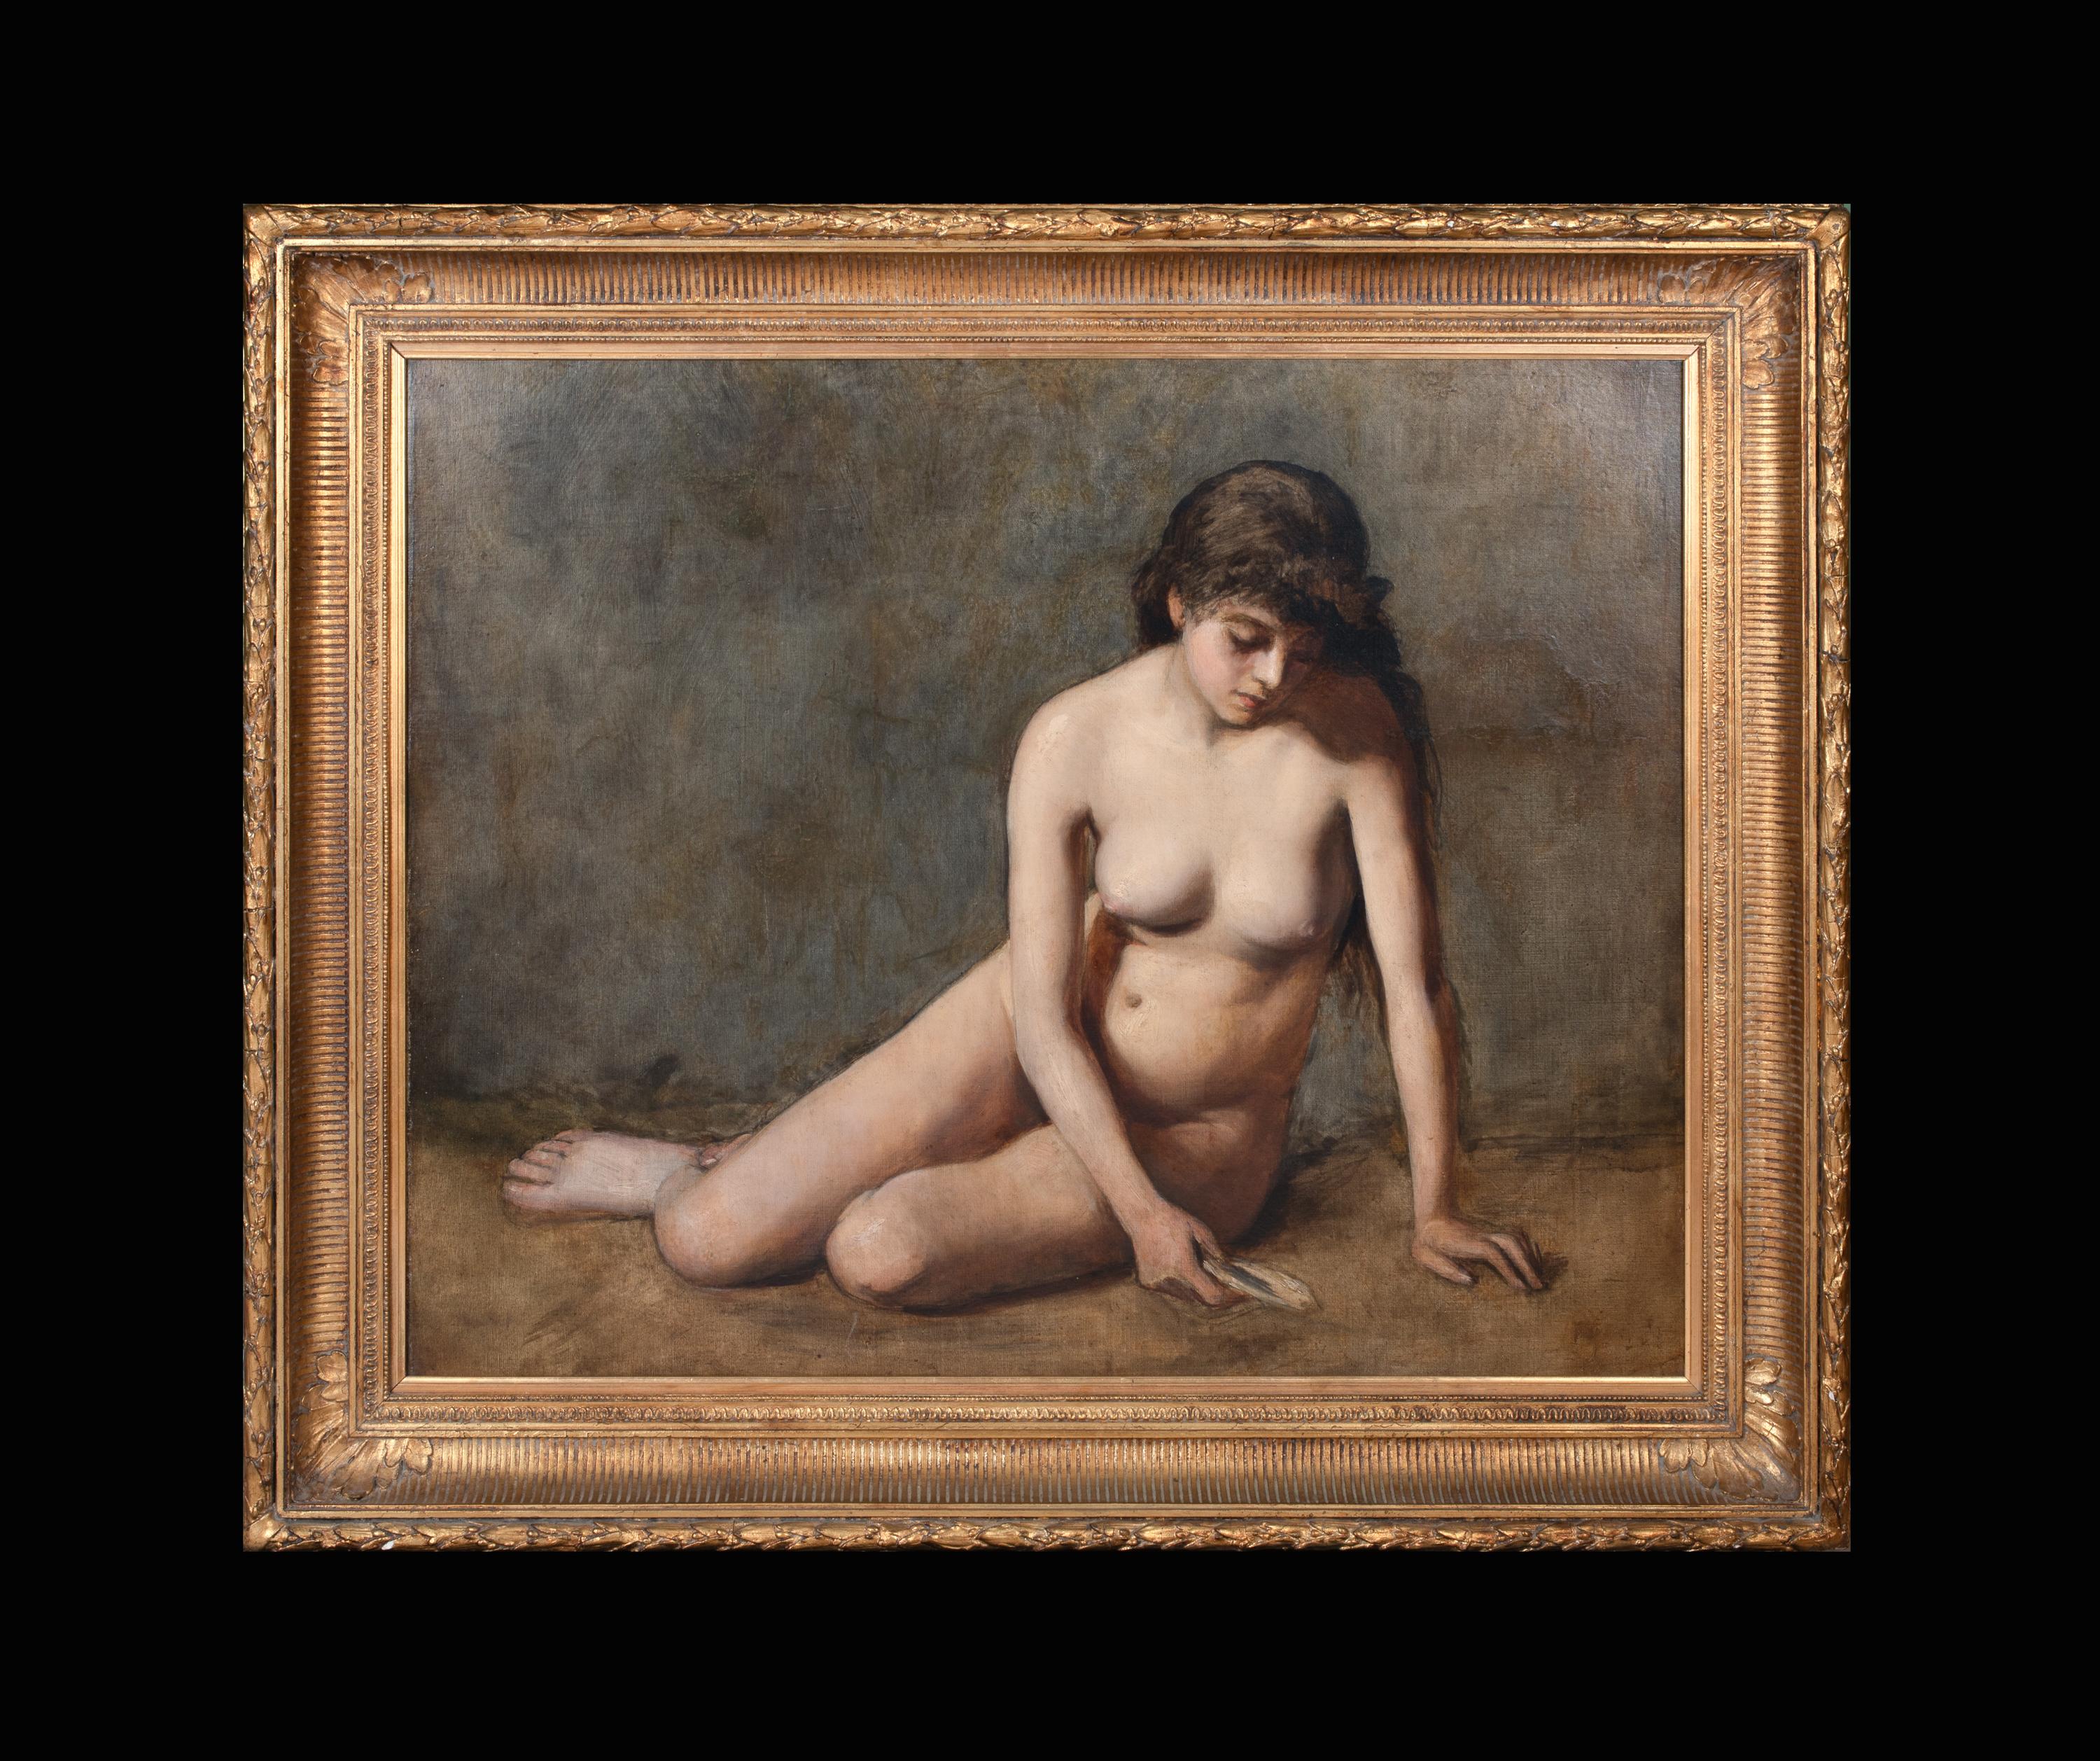 Nude Female Holding a Seashell, 19th Century  - Painting by Jean-Baptiste-Camille Corot